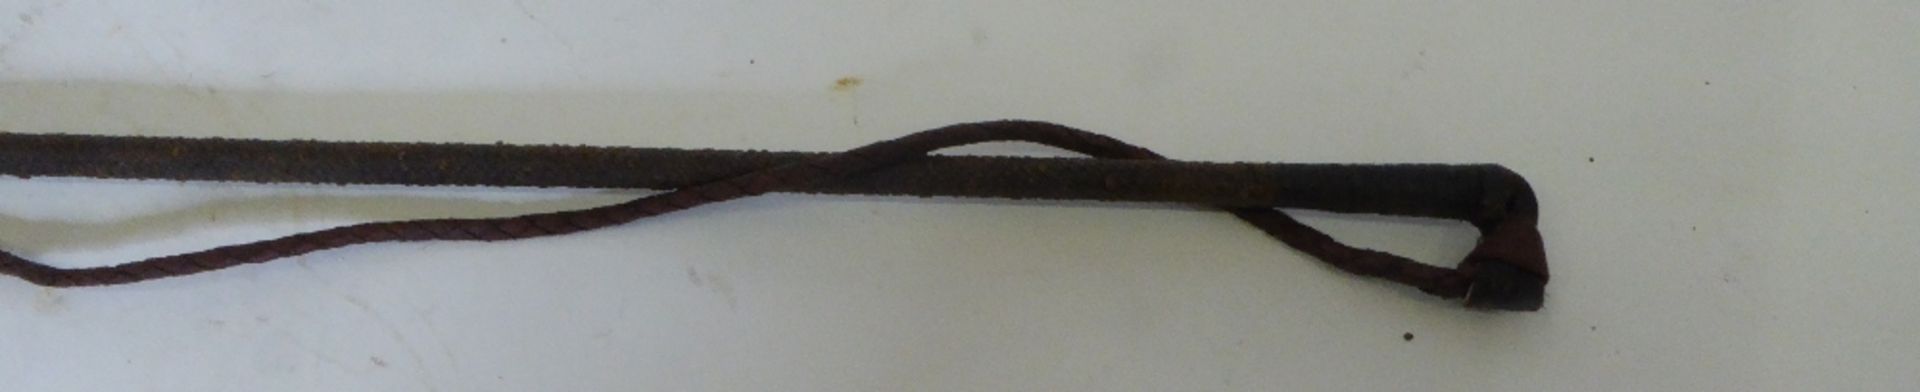 Dealer's whip stamped Swaine (view in security pen) - Image 2 of 2